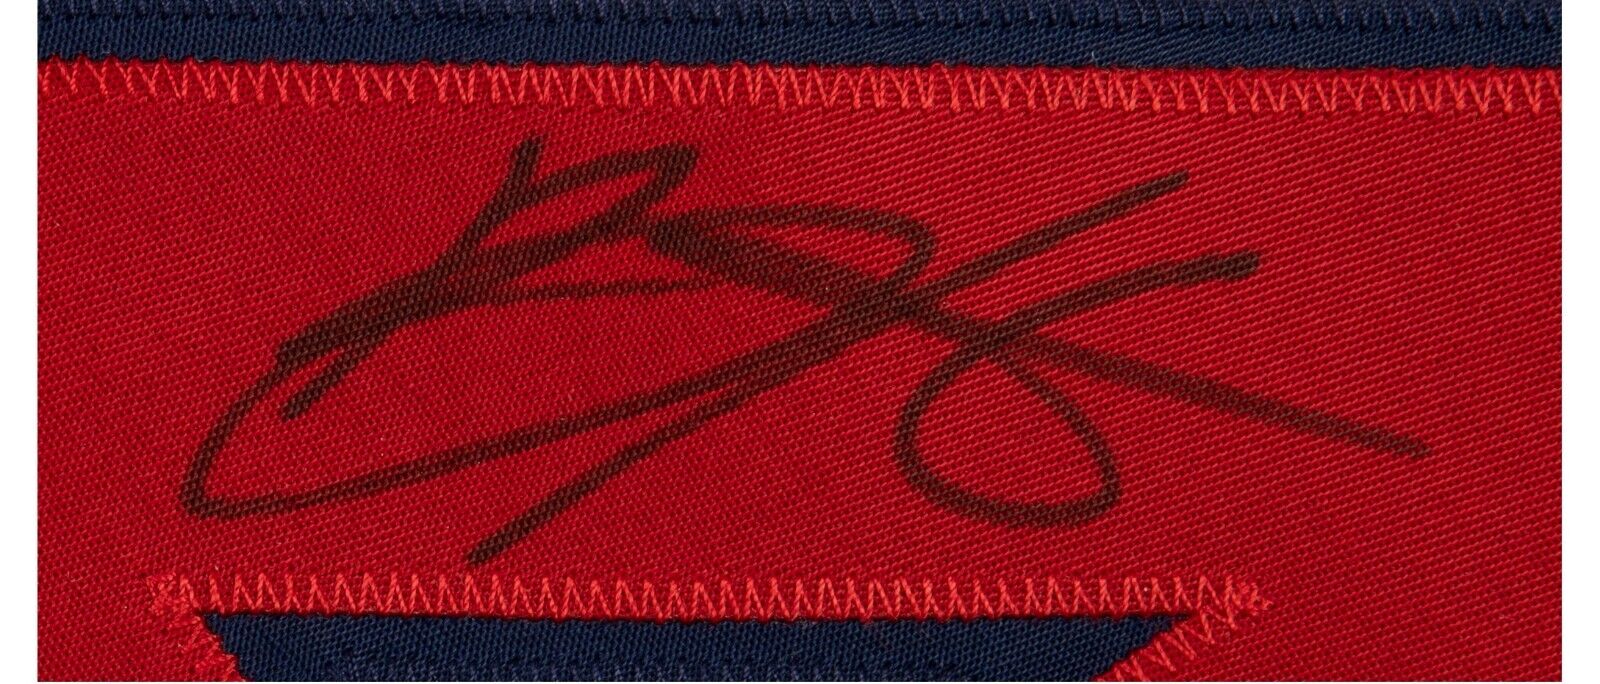 Bryce Harper Signed Authentic Washington Nationals Game Model Jersey Beckett COA